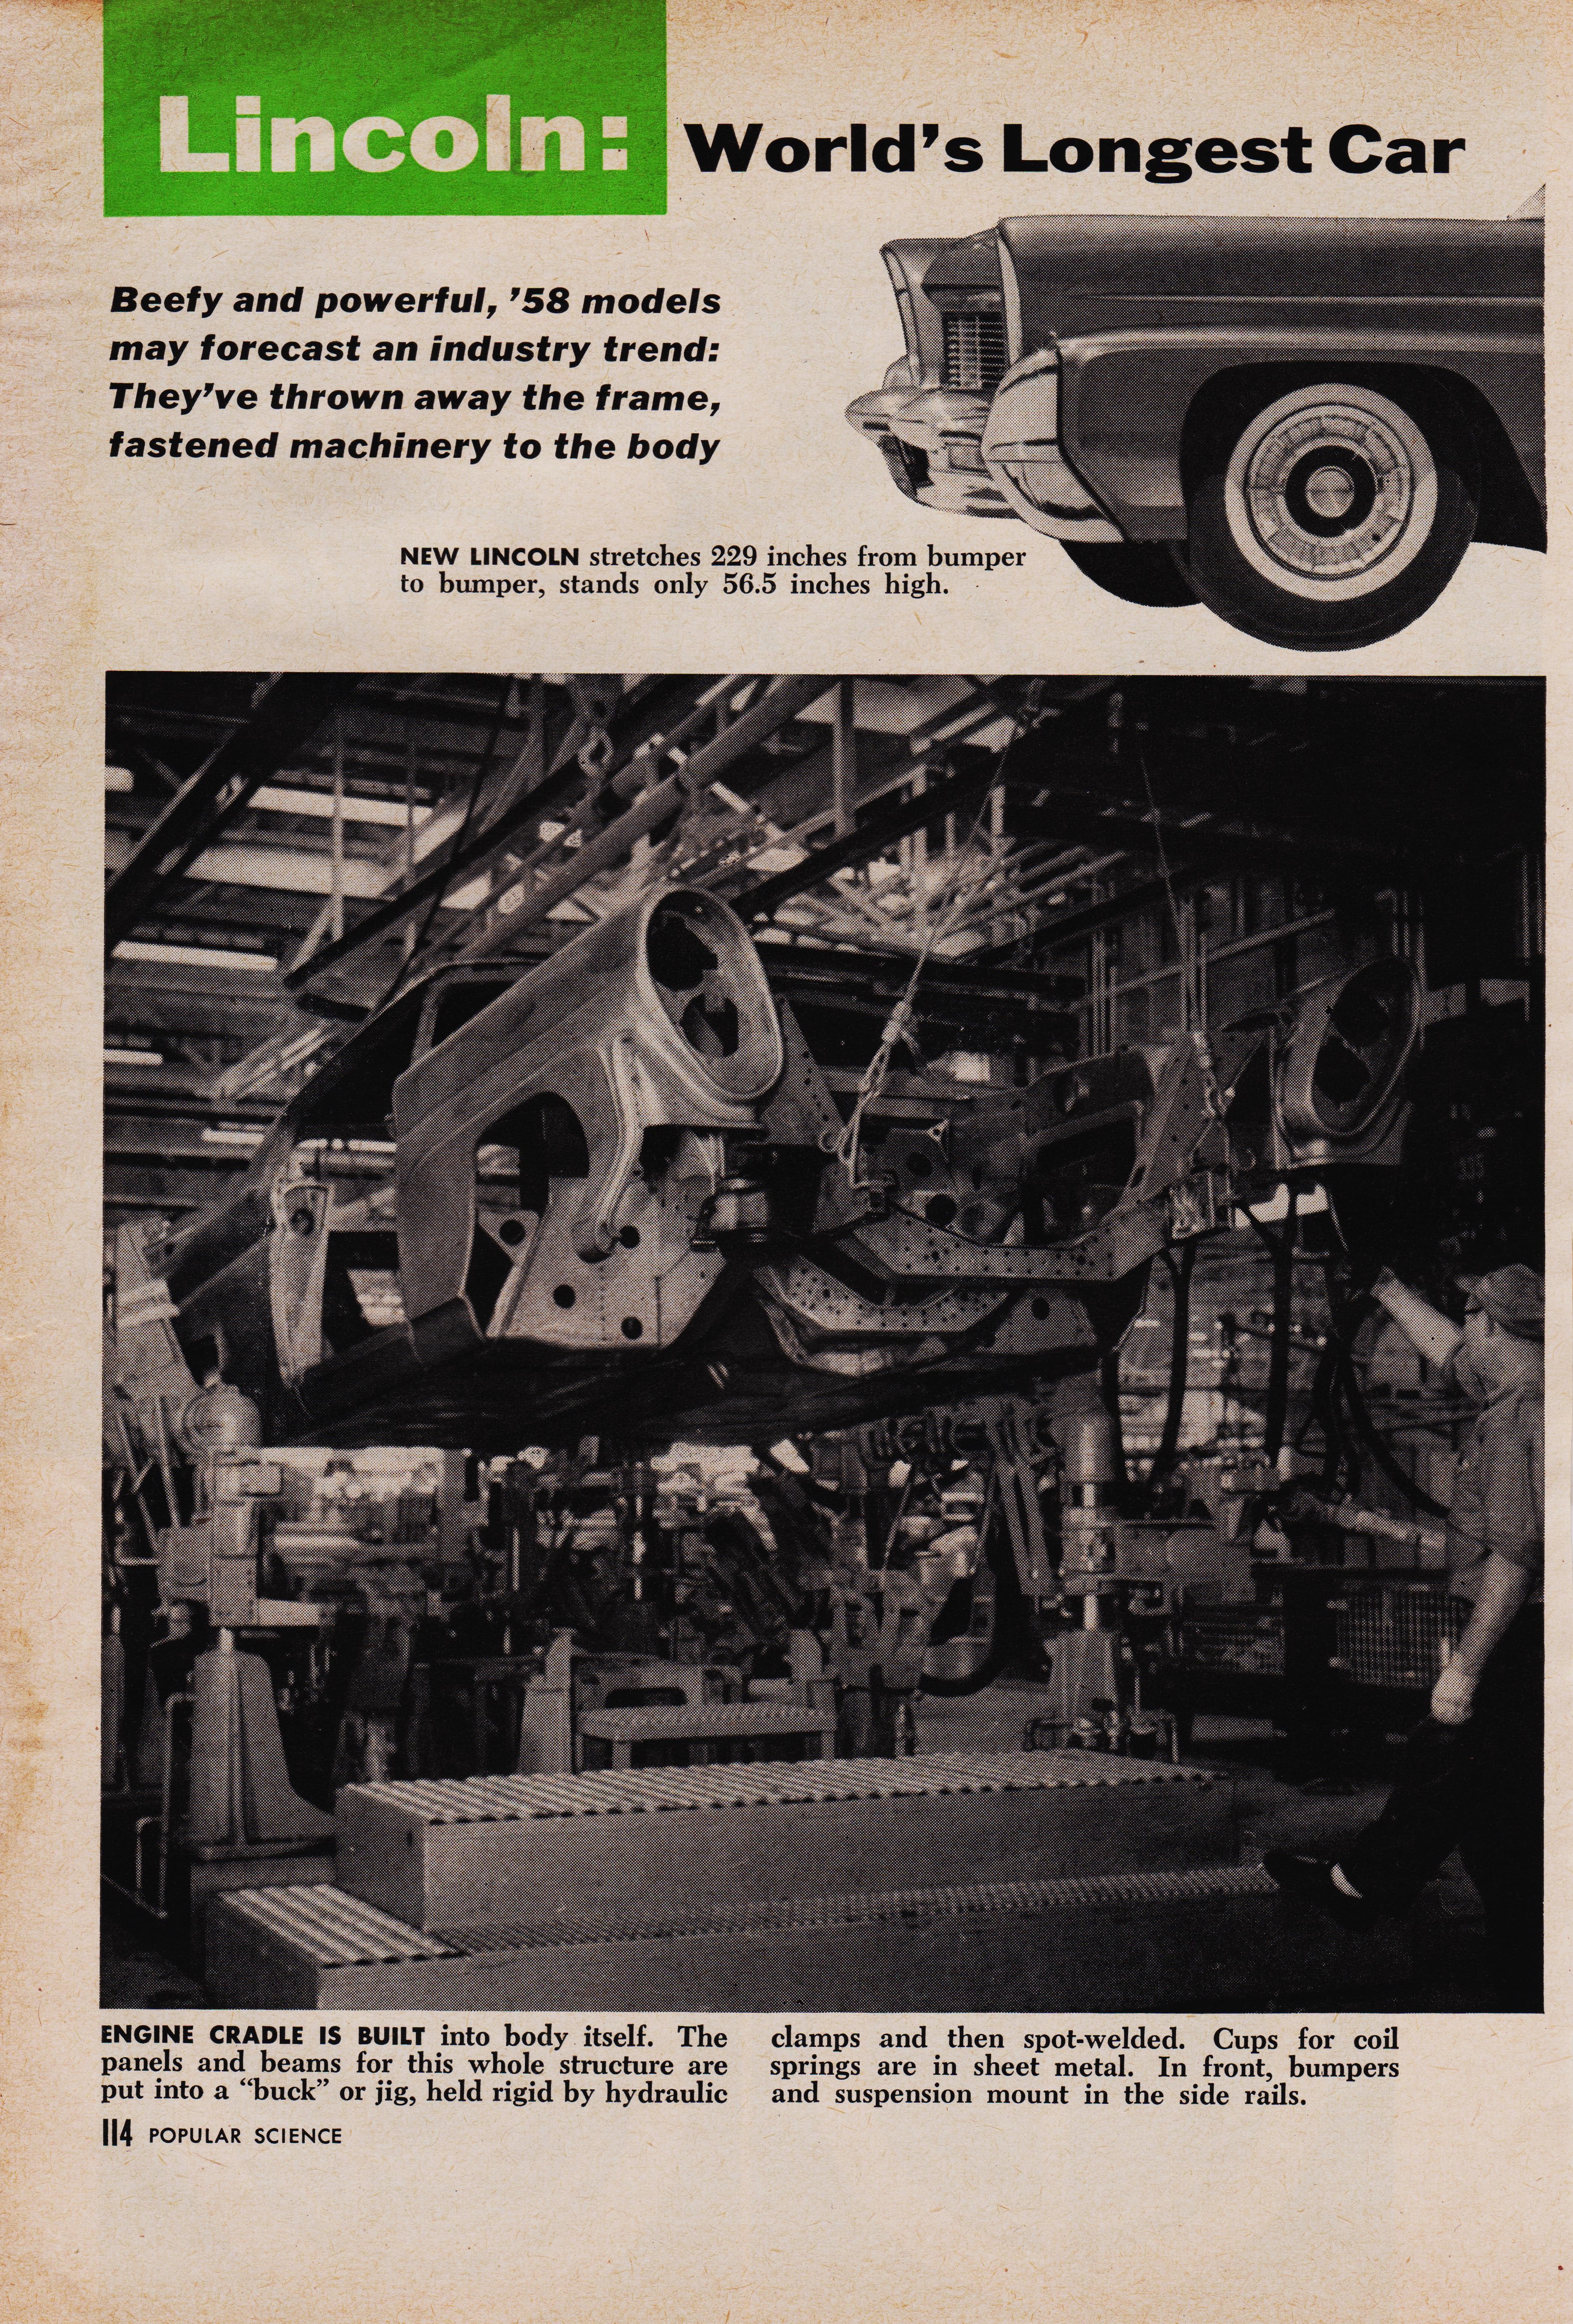 https://www.antiquemachinery.com/images-Popular-Science/Scientific-American-1958-Cars-pg-114-Lincoln-Worlds-Longest-Car-engine-cradle.jpeg